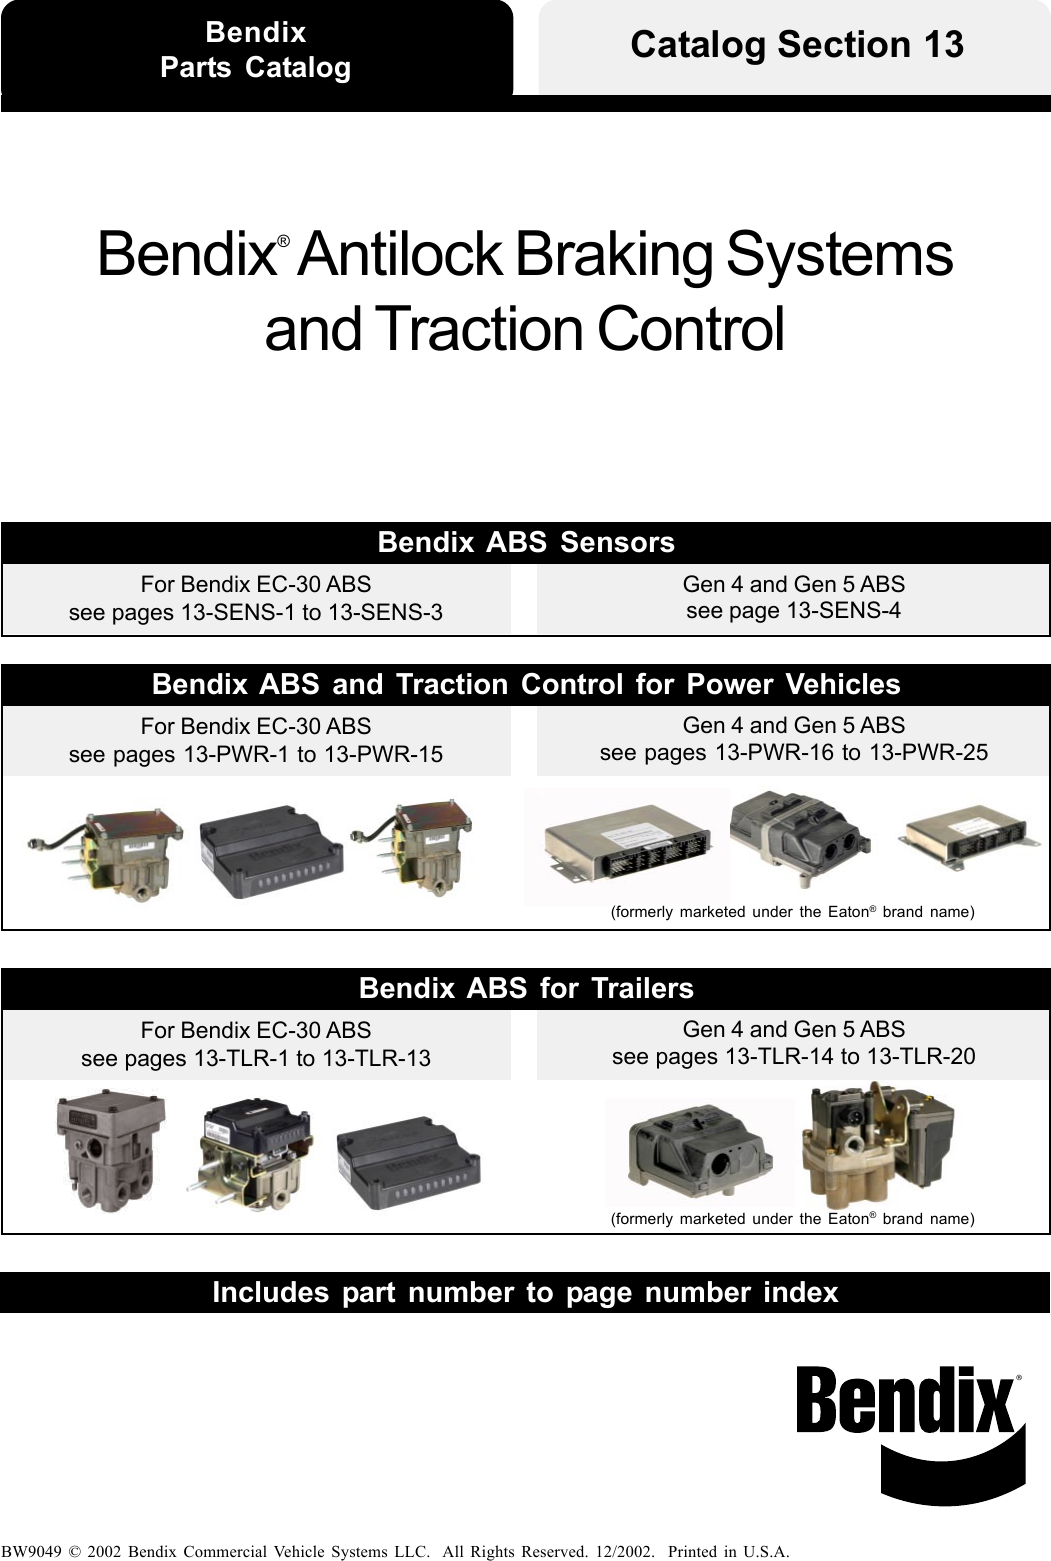 is recalibration required for a new brake demand sensor on a bendix abs system